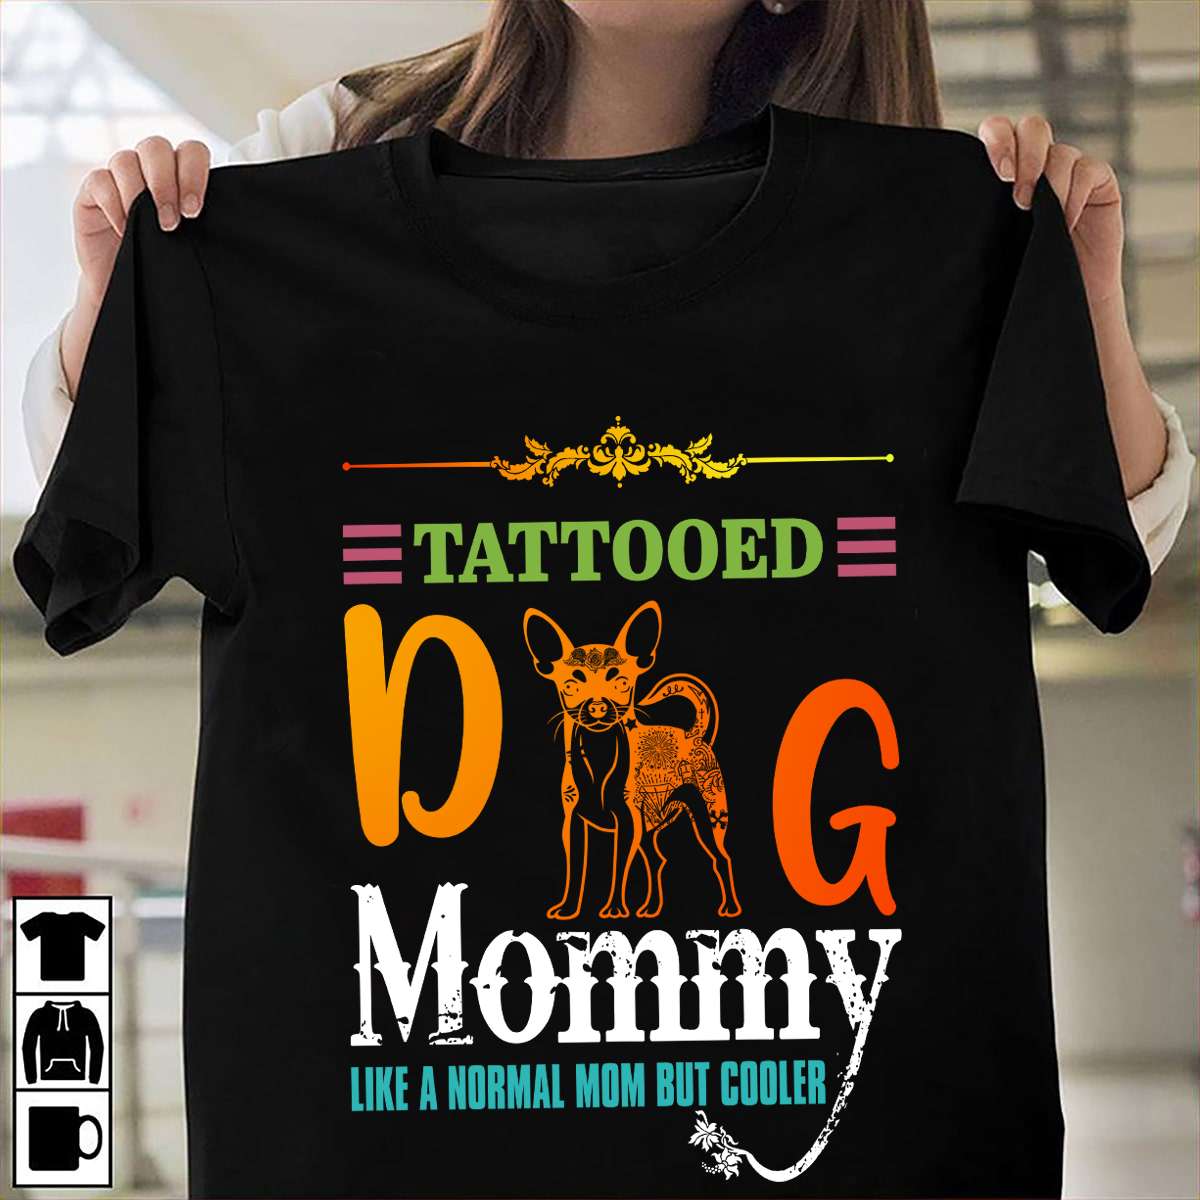 Tattooed dog mommy like a normal mom but cooler - Dog mom, tattooed mother